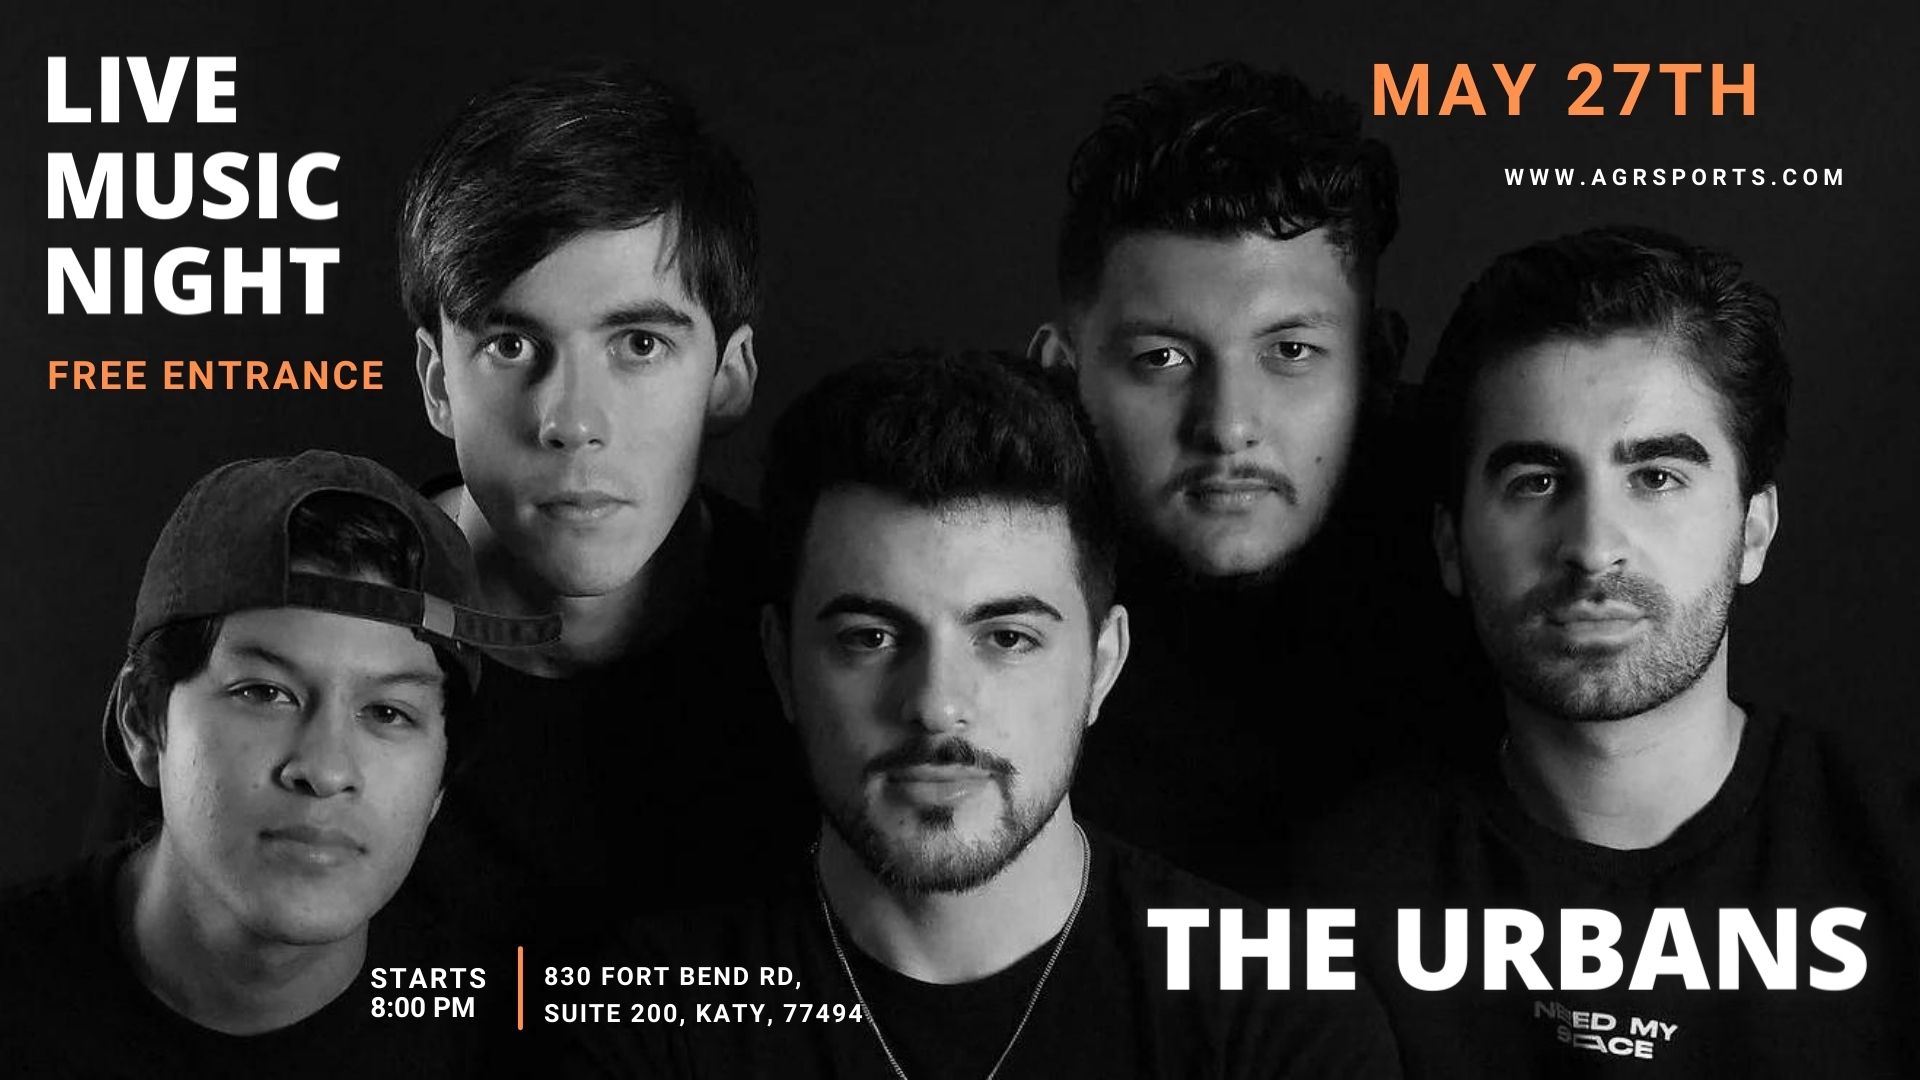 The Urbans – Live Music Night in Katy